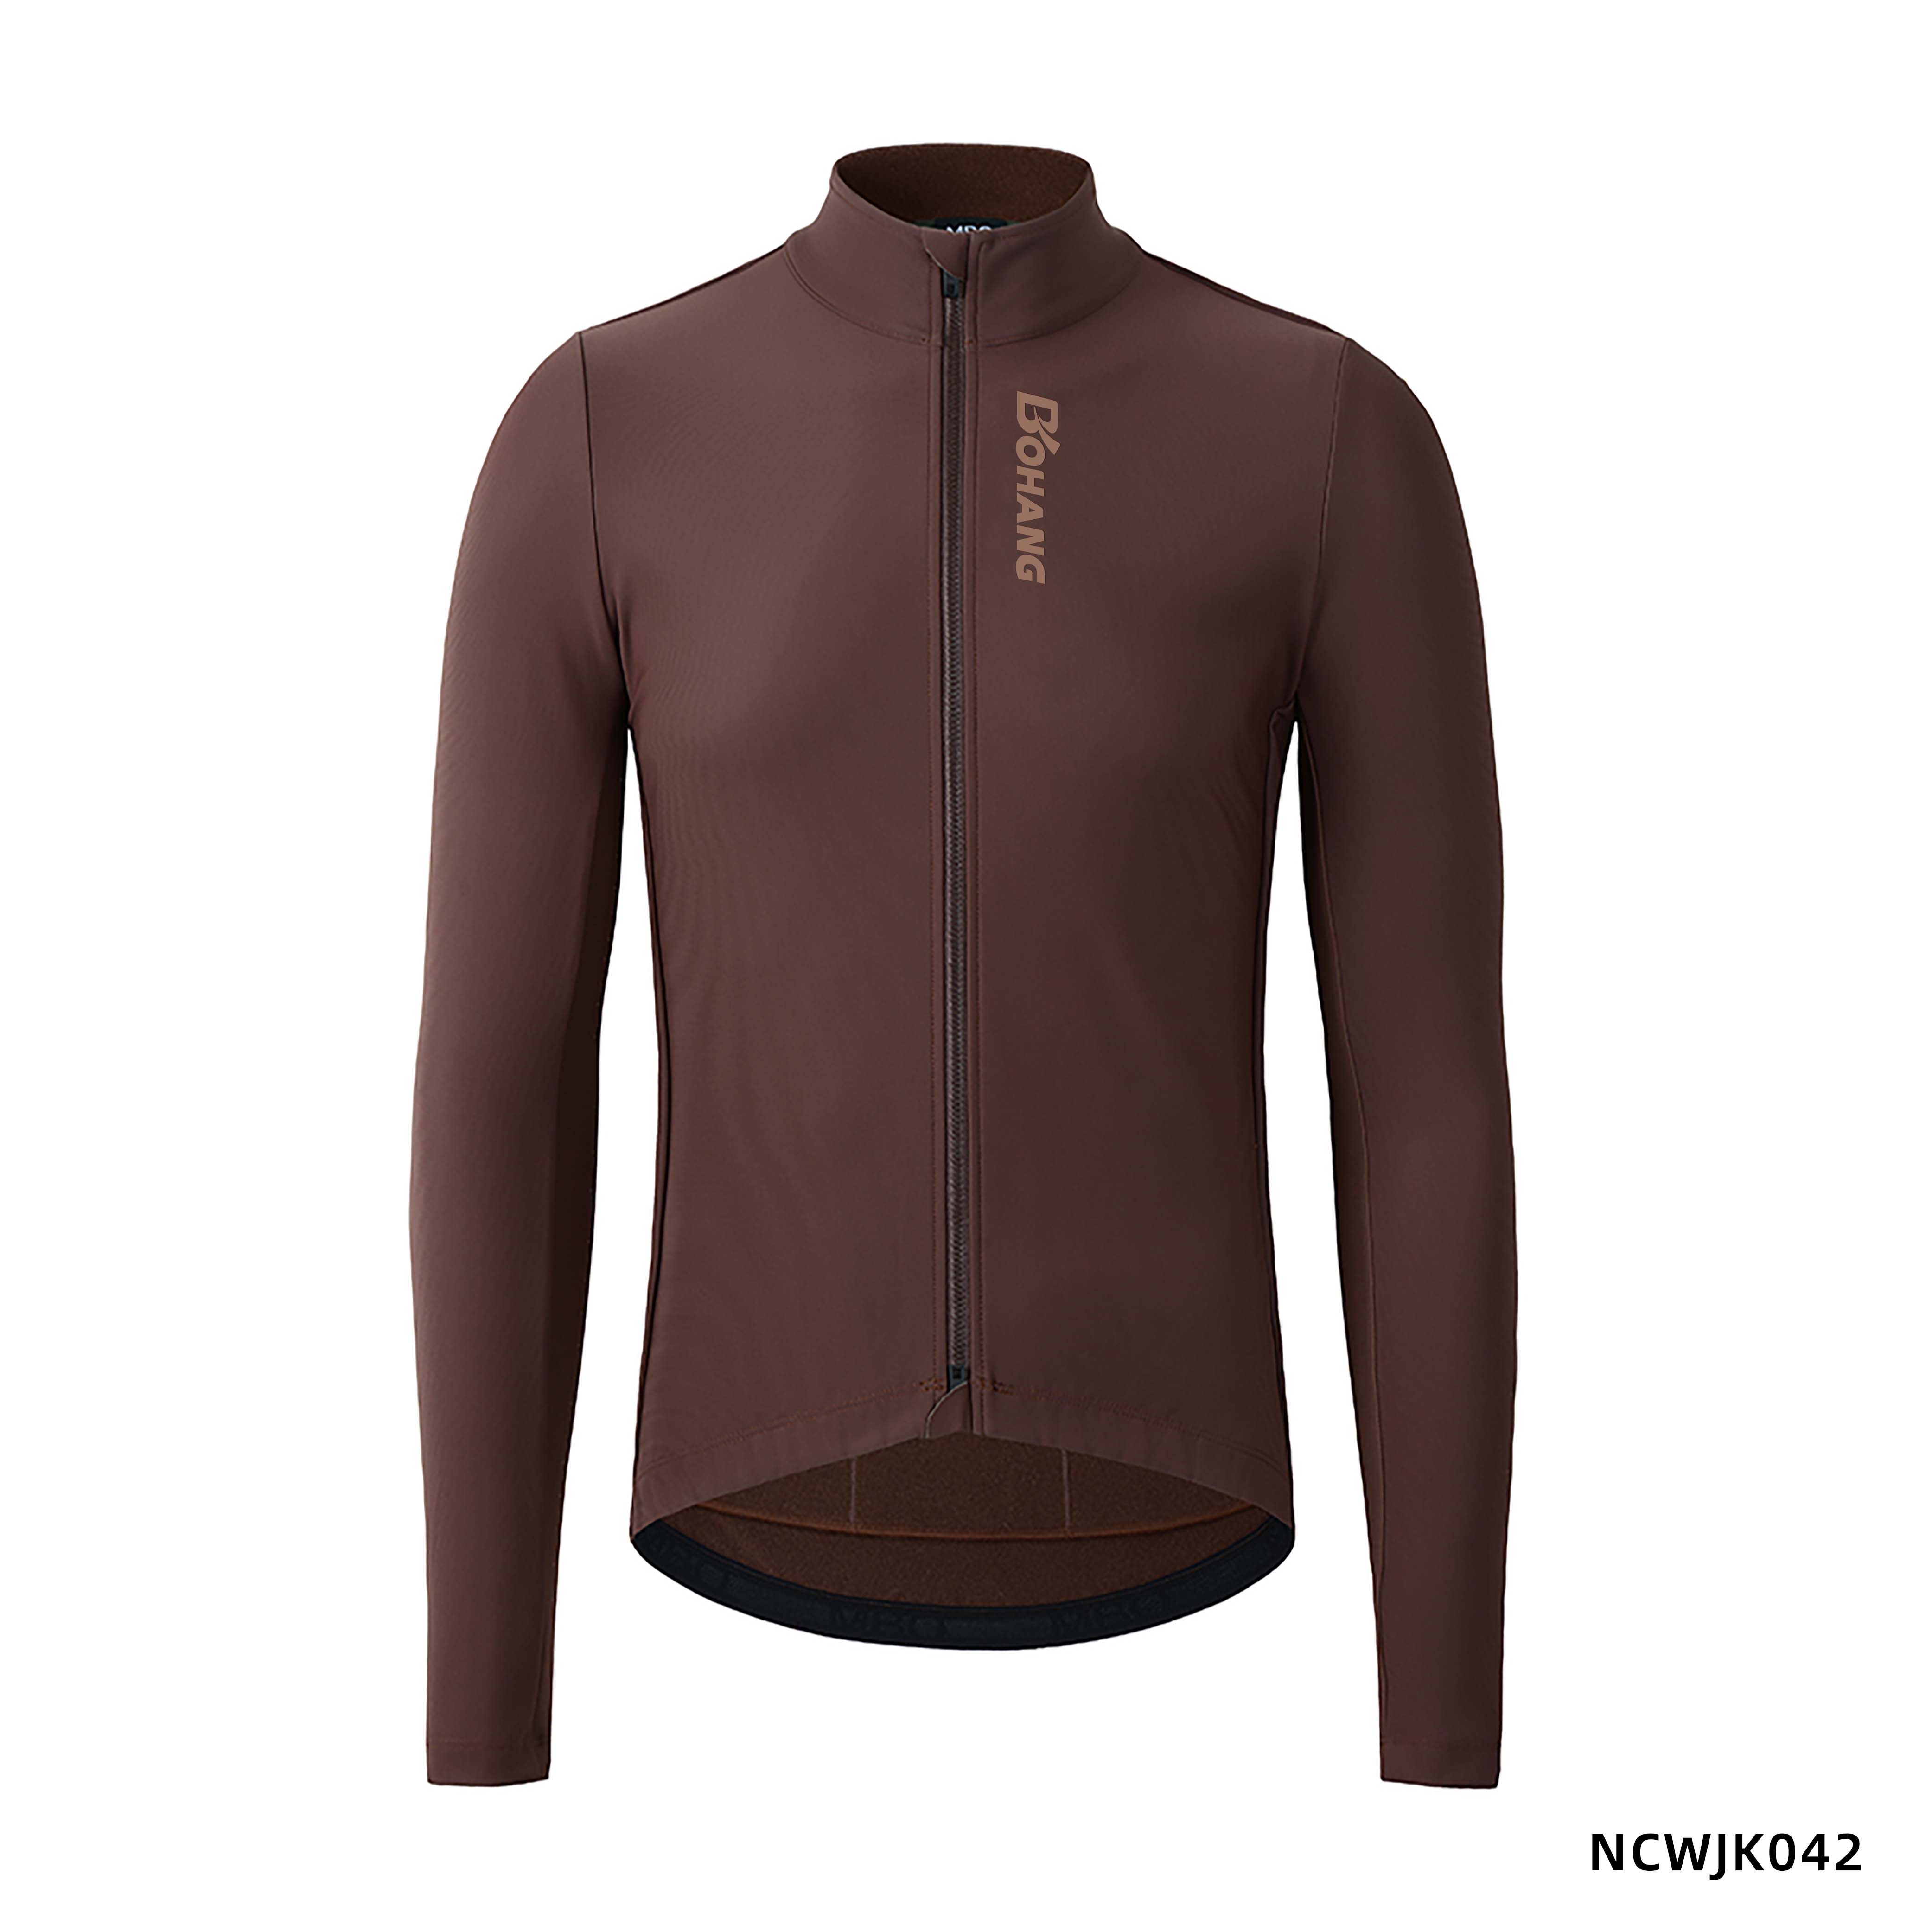 Discover the NCWJK042 Windproof Jacket with DWR Durable Water Repellent Coating